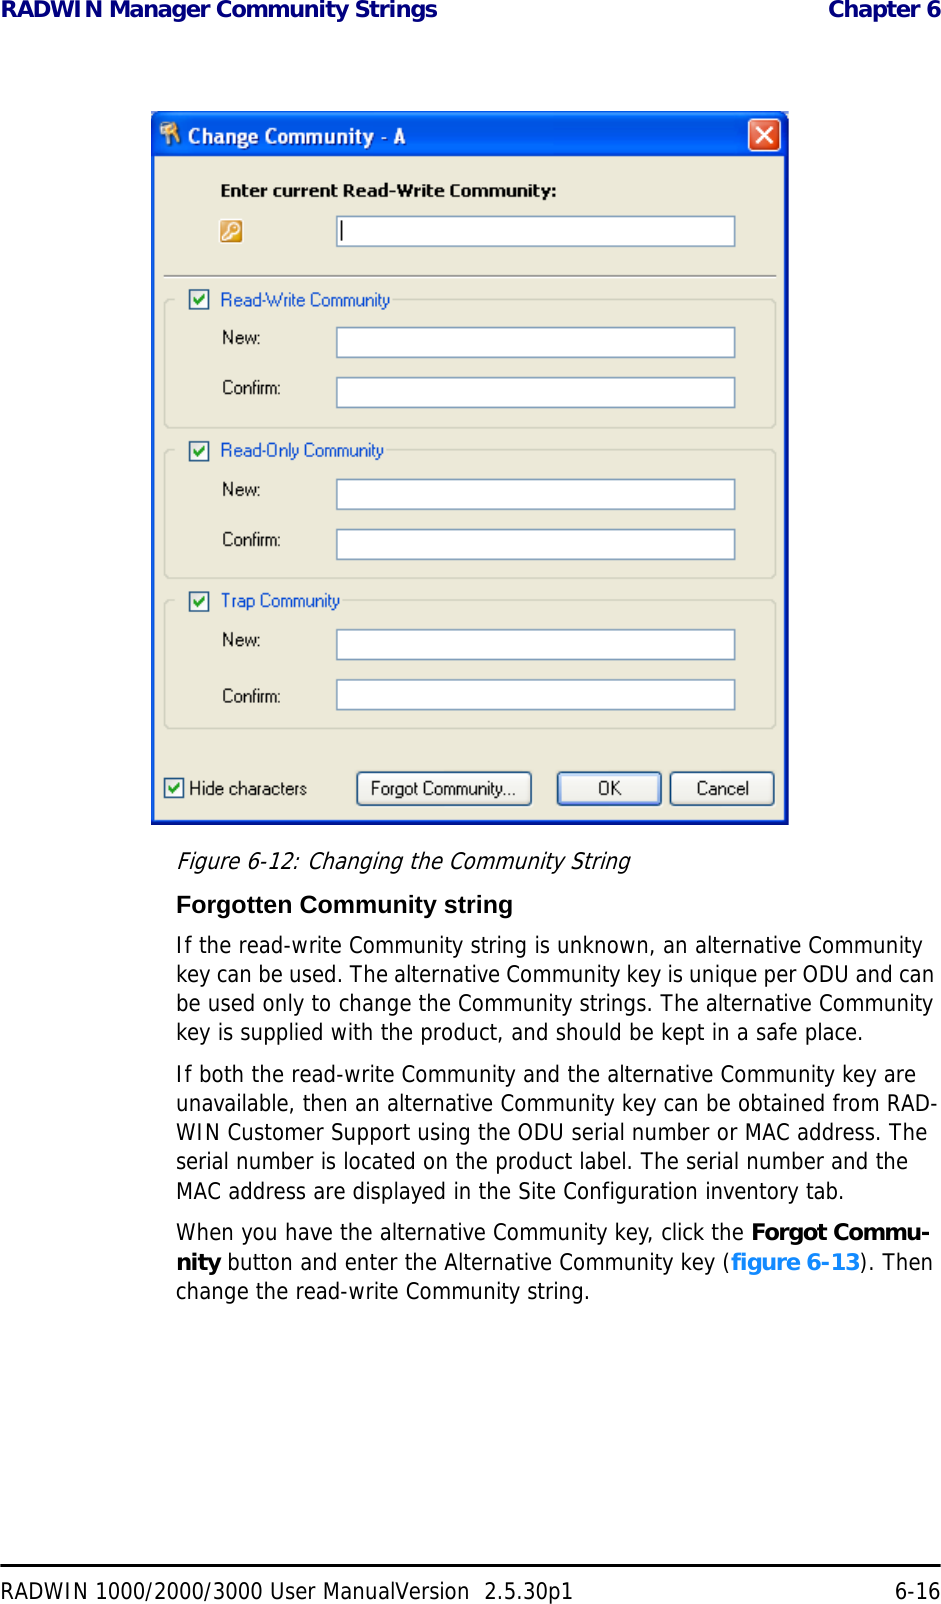 RADWIN Manager Community Strings  Chapter 6RADWIN 1000/2000/3000 User ManualVersion  2.5.30p1 6-16Figure 6-12: Changing the Community StringForgotten Community stringIf the read-write Community string is unknown, an alternative Community key can be used. The alternative Community key is unique per ODU and can be used only to change the Community strings. The alternative Community key is supplied with the product, and should be kept in a safe place. If both the read-write Community and the alternative Community key are unavailable, then an alternative Community key can be obtained from RAD-WIN Customer Support using the ODU serial number or MAC address. The serial number is located on the product label. The serial number and the MAC address are displayed in the Site Configuration inventory tab.When you have the alternative Community key, click the Forgot Commu-nity button and enter the Alternative Community key (figure 6-13). Then change the read-write Community string.